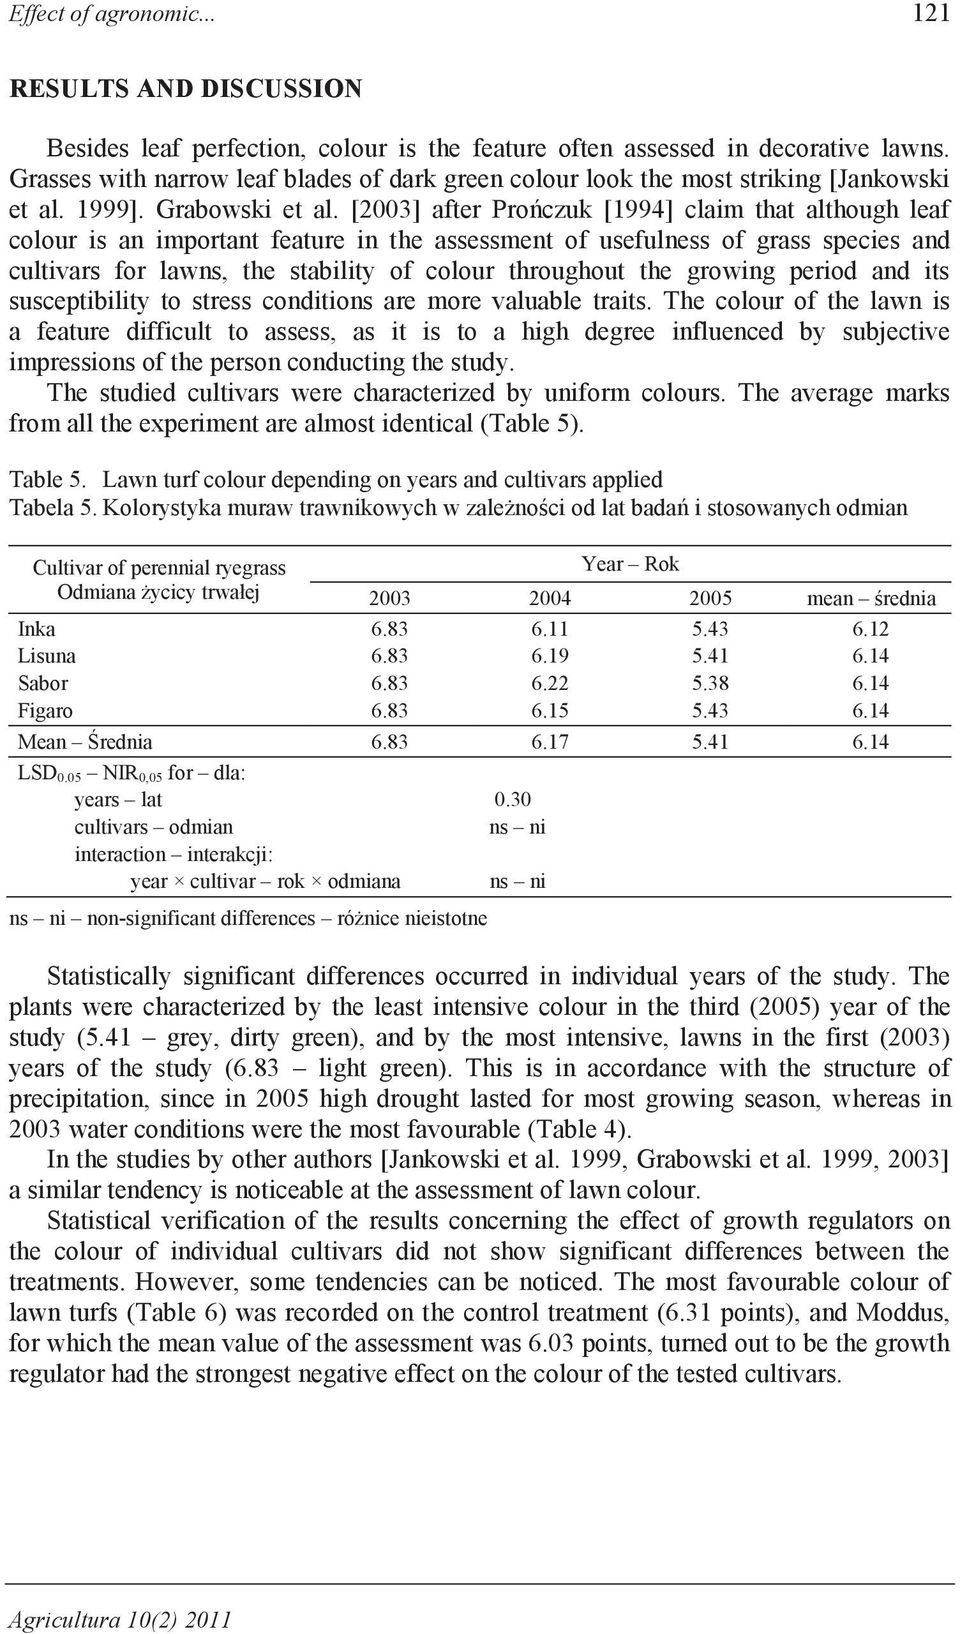 [2003] after Prończuk [1994] claim that although leaf colour is an important feature in the assessment of usefulness of grass species and cultivars for lawns, the stability of colour throughout the